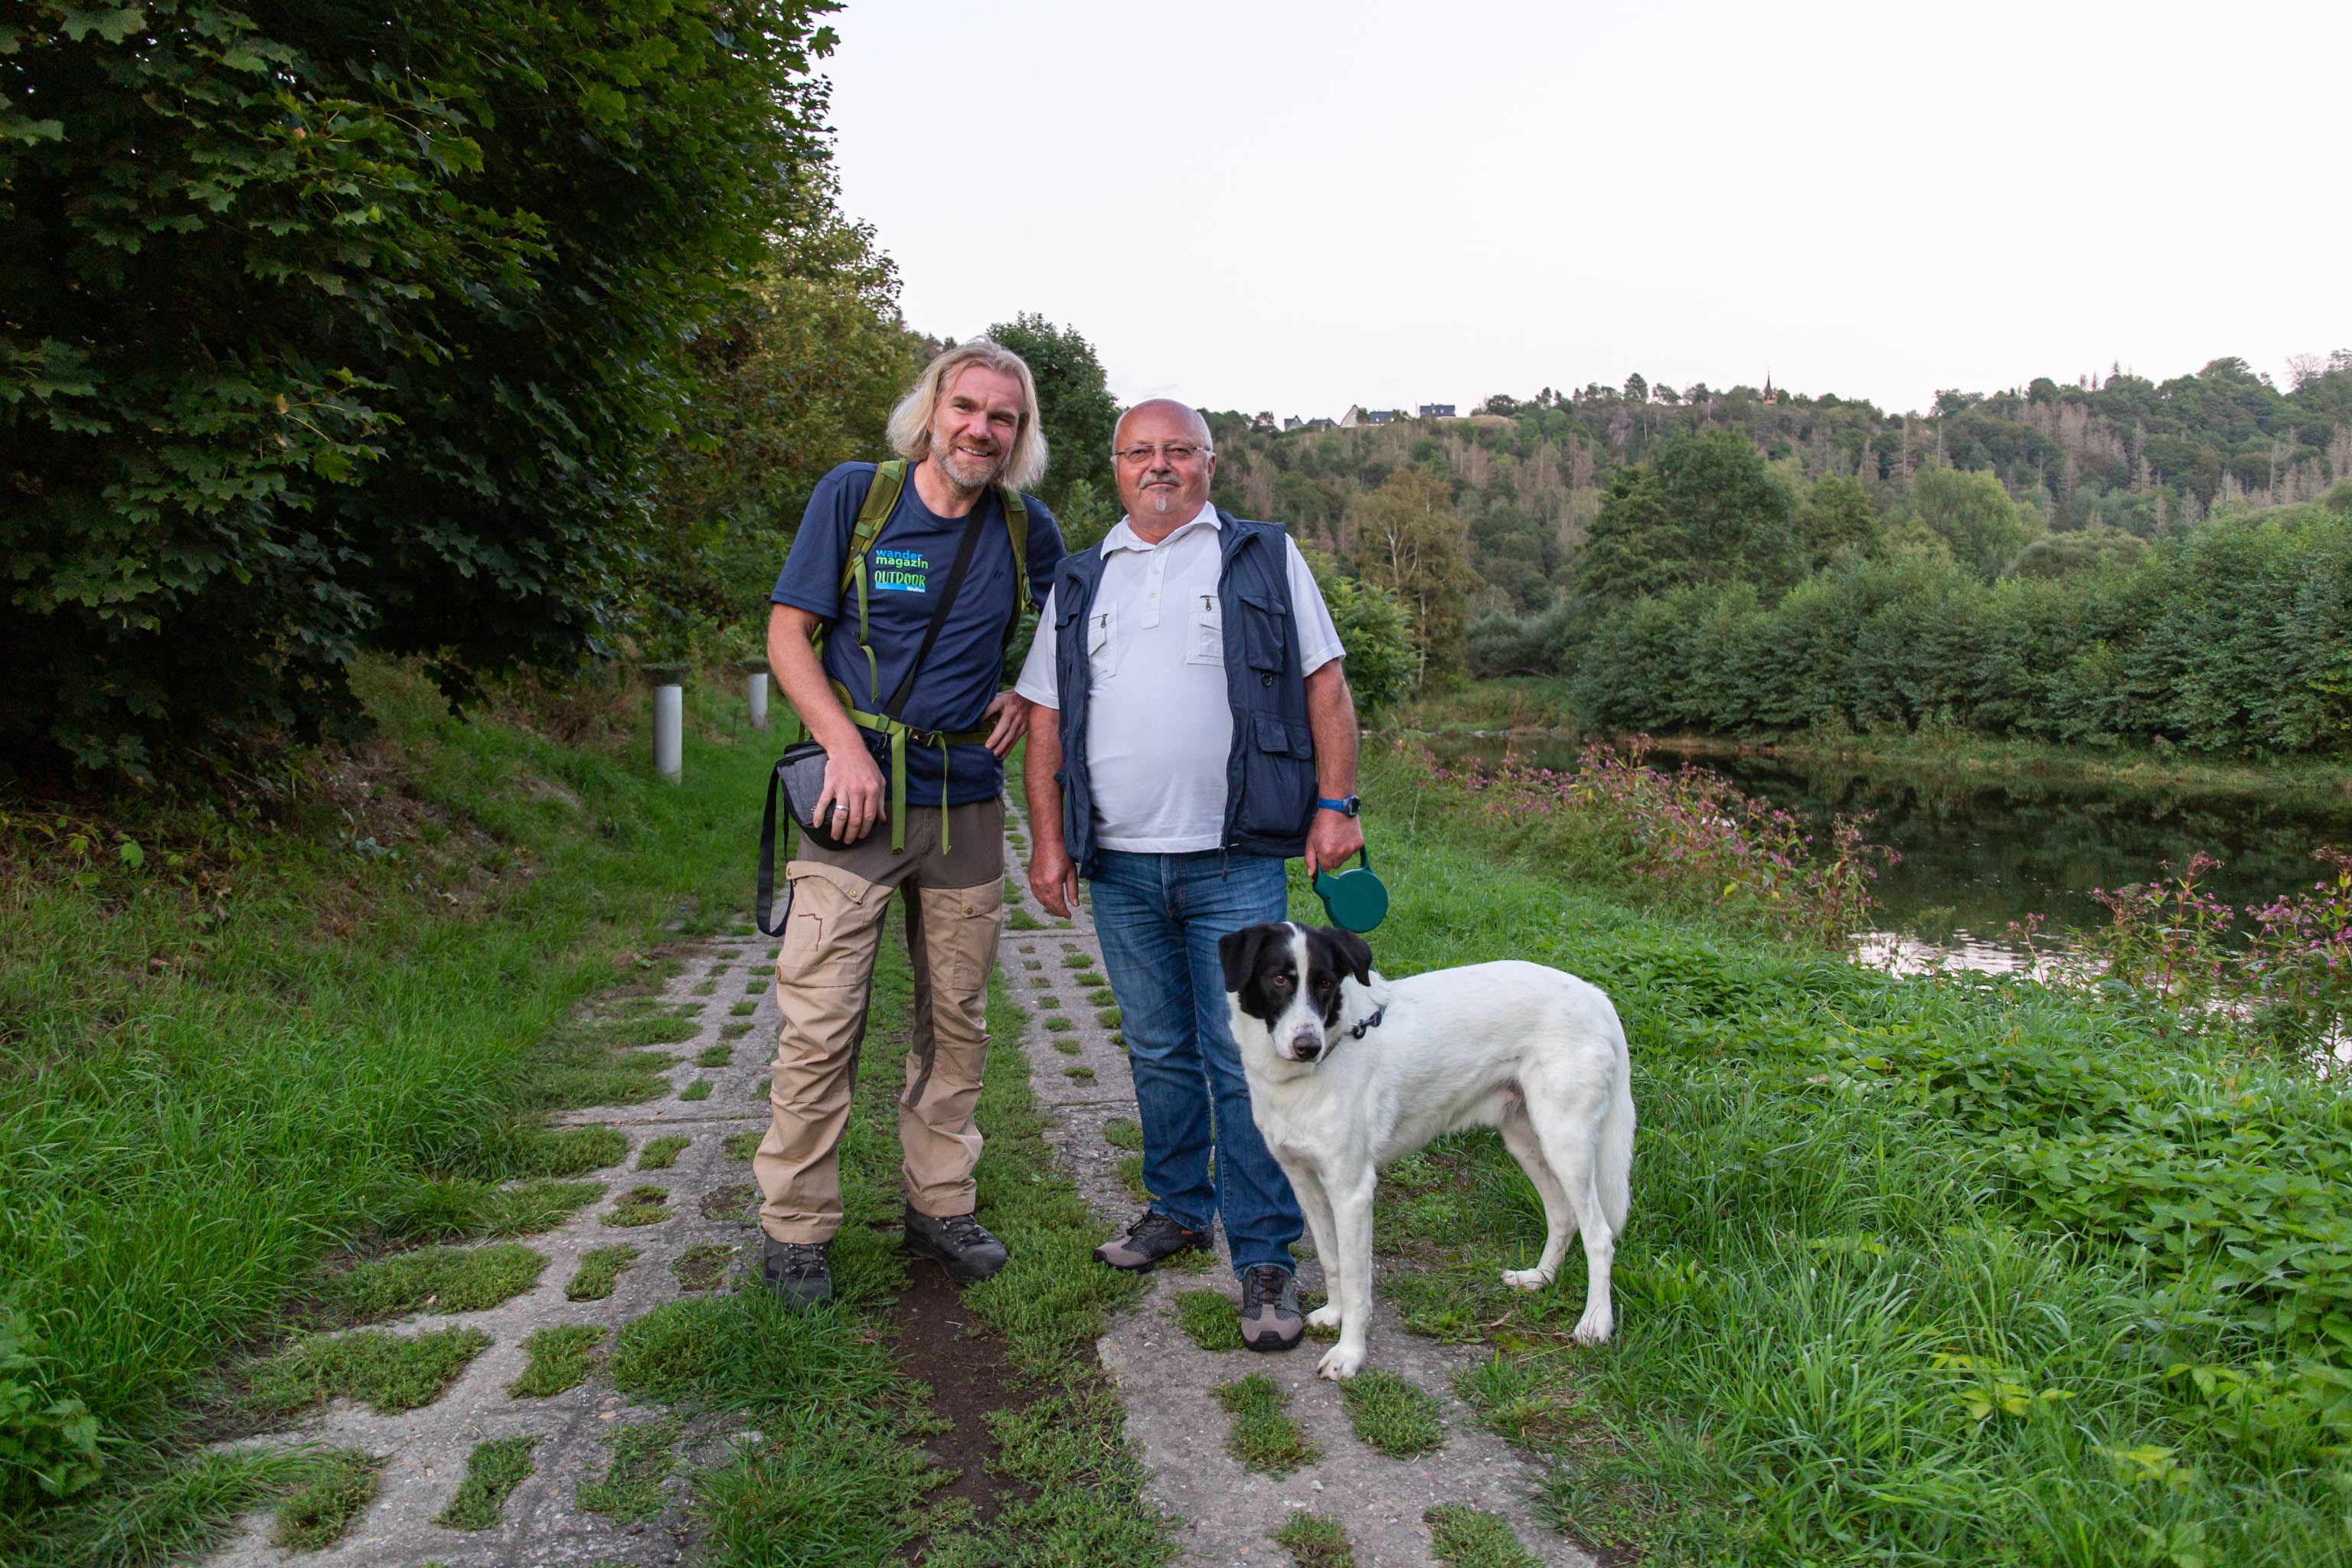 Hiking Germany’s Green Belt with GDR escapee Günter Wetzel